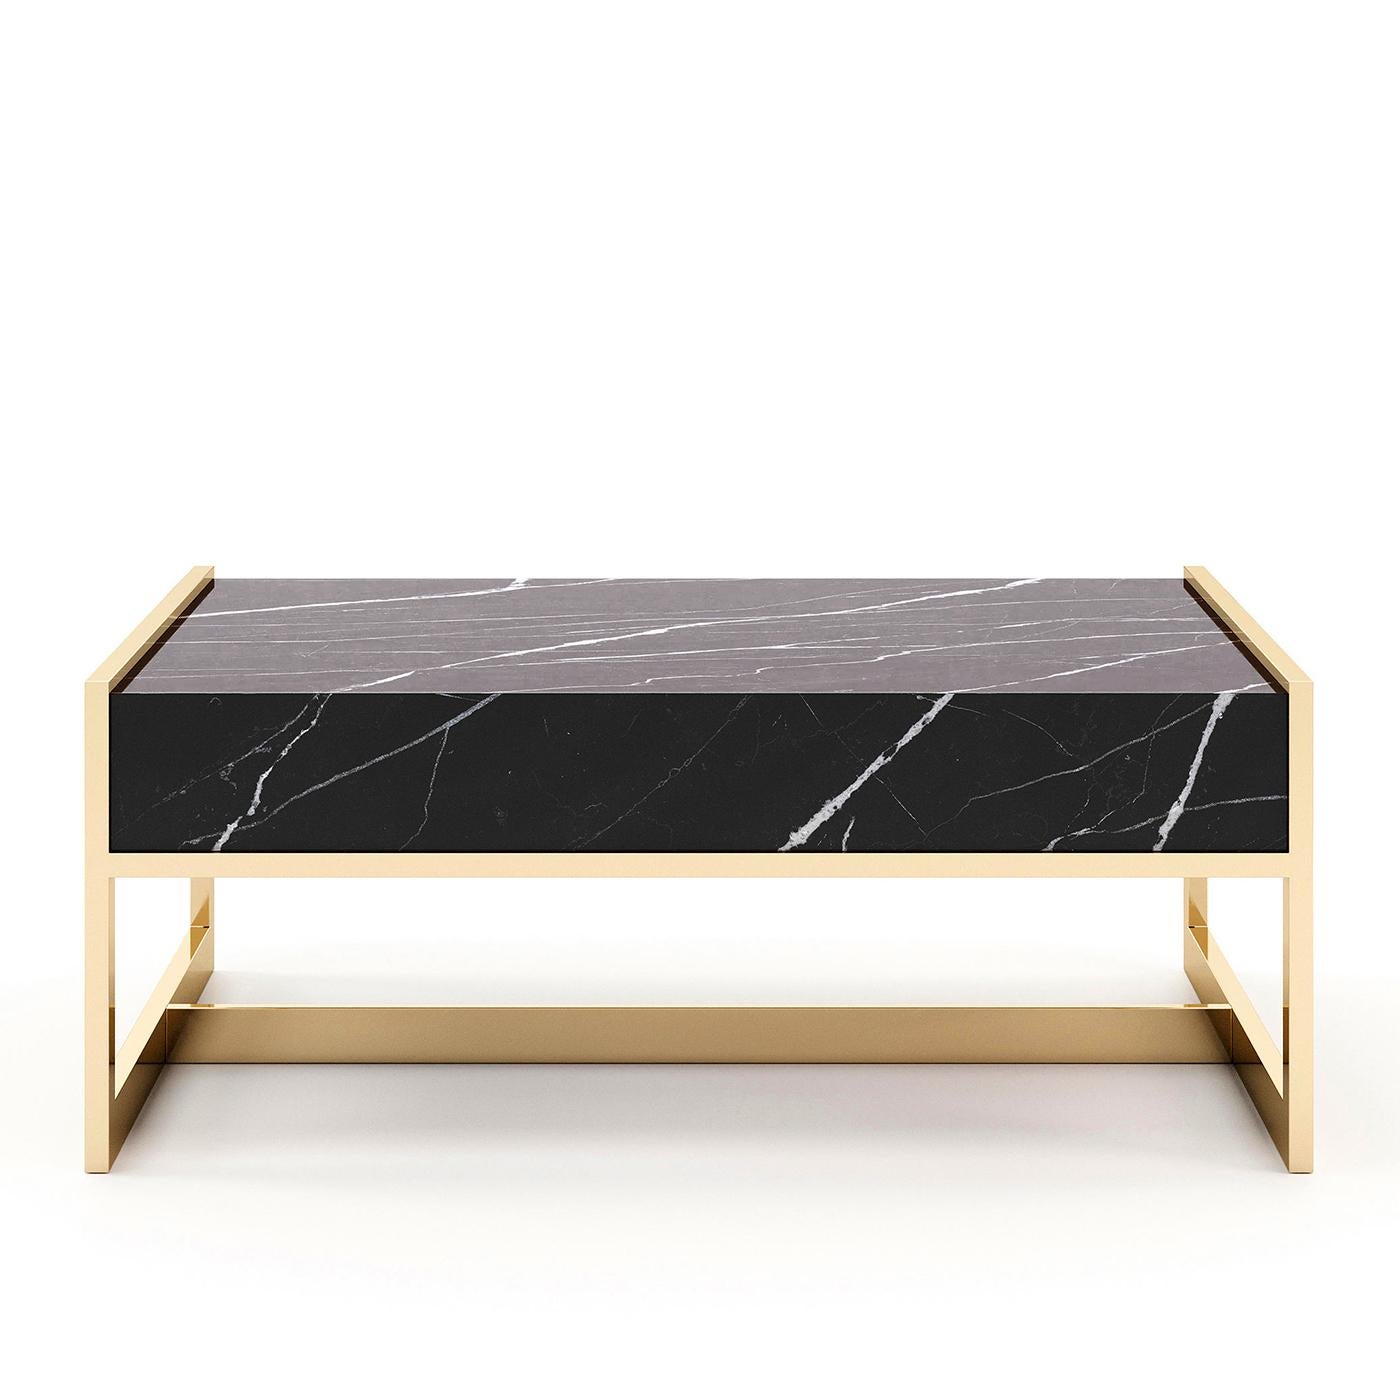 Coffee table lounge down marble with black marble top and
with polished stainless steel structure in gold finish.
Also available with other stainless steel finishes on request.